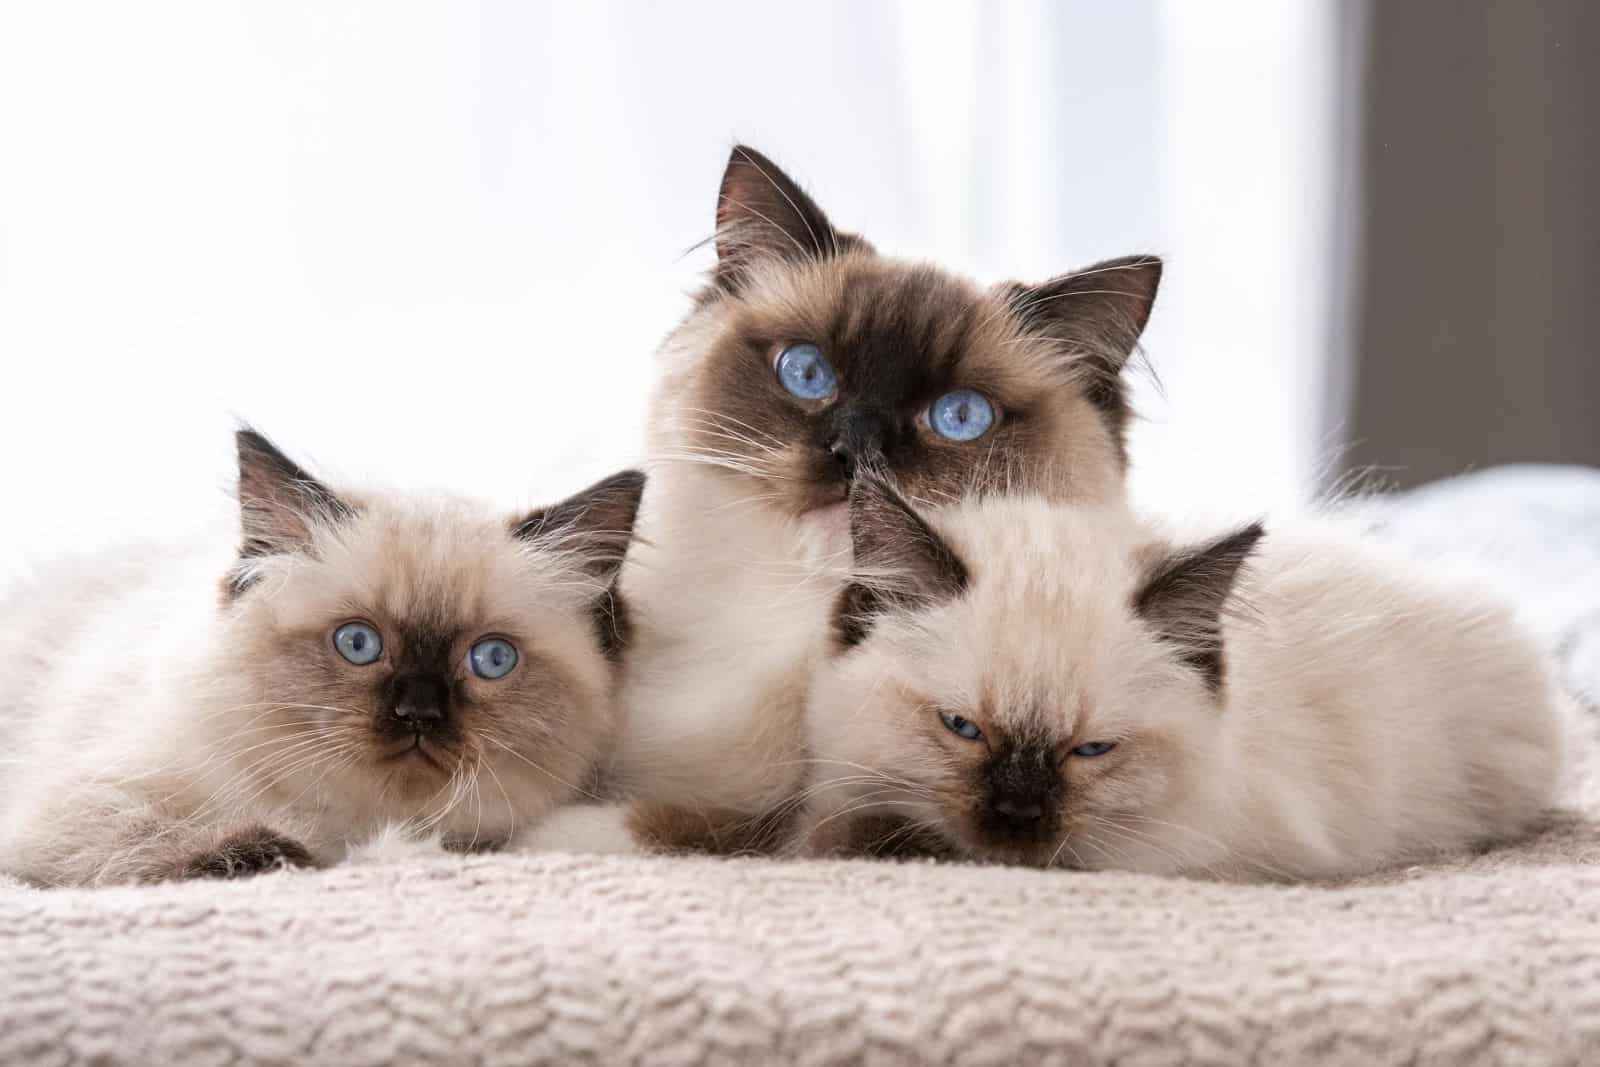 Adorable ragdoll cat with beautiful blue eyes lying in the bed with two sleeping kittens